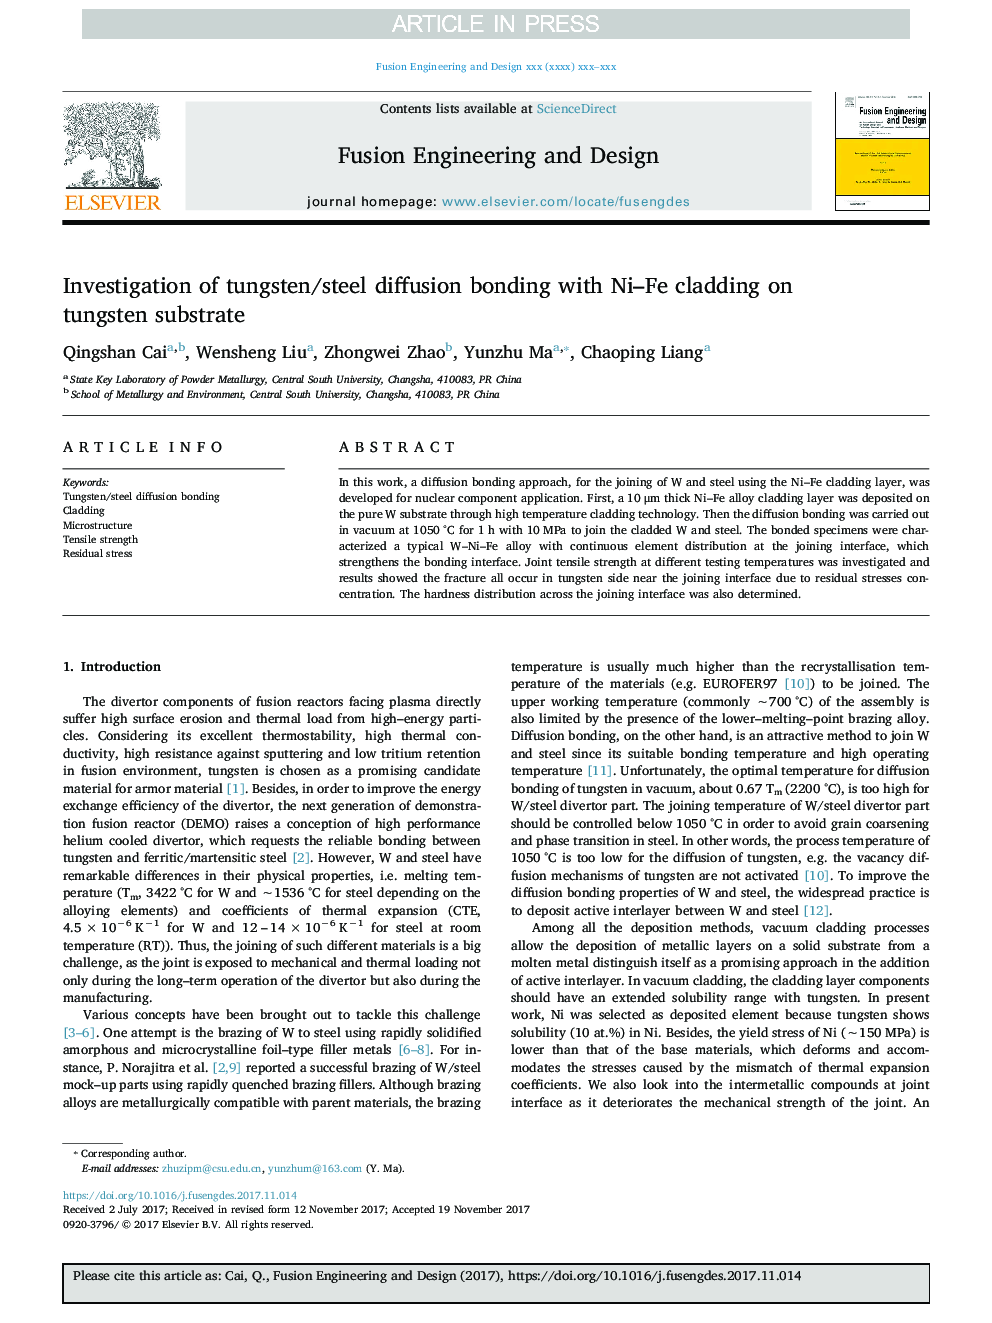 Investigation of tungsten/steel diffusion bonding with Ni-Fe cladding on tungsten substrate